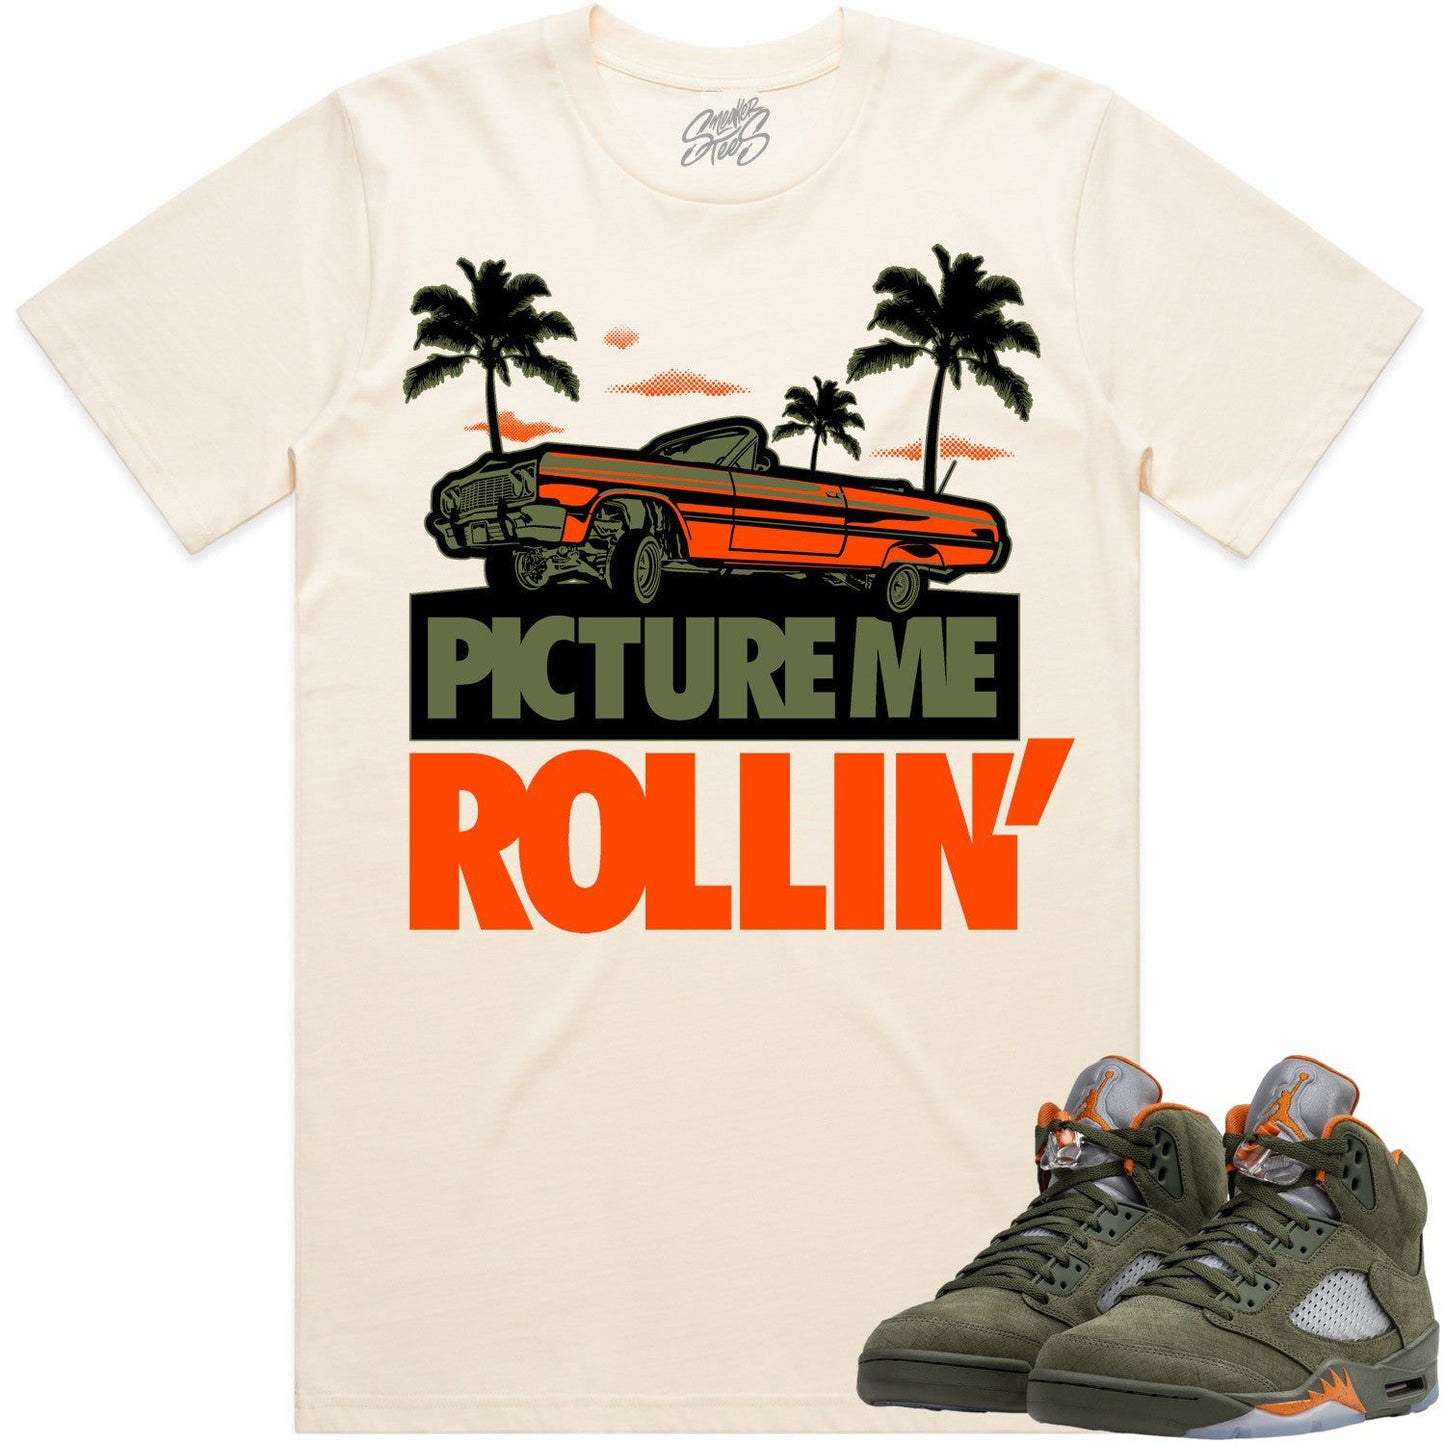 Olive 5s Shirts - Jordan Retro 5 Olive Sneaker Tees - Picture me Rollin